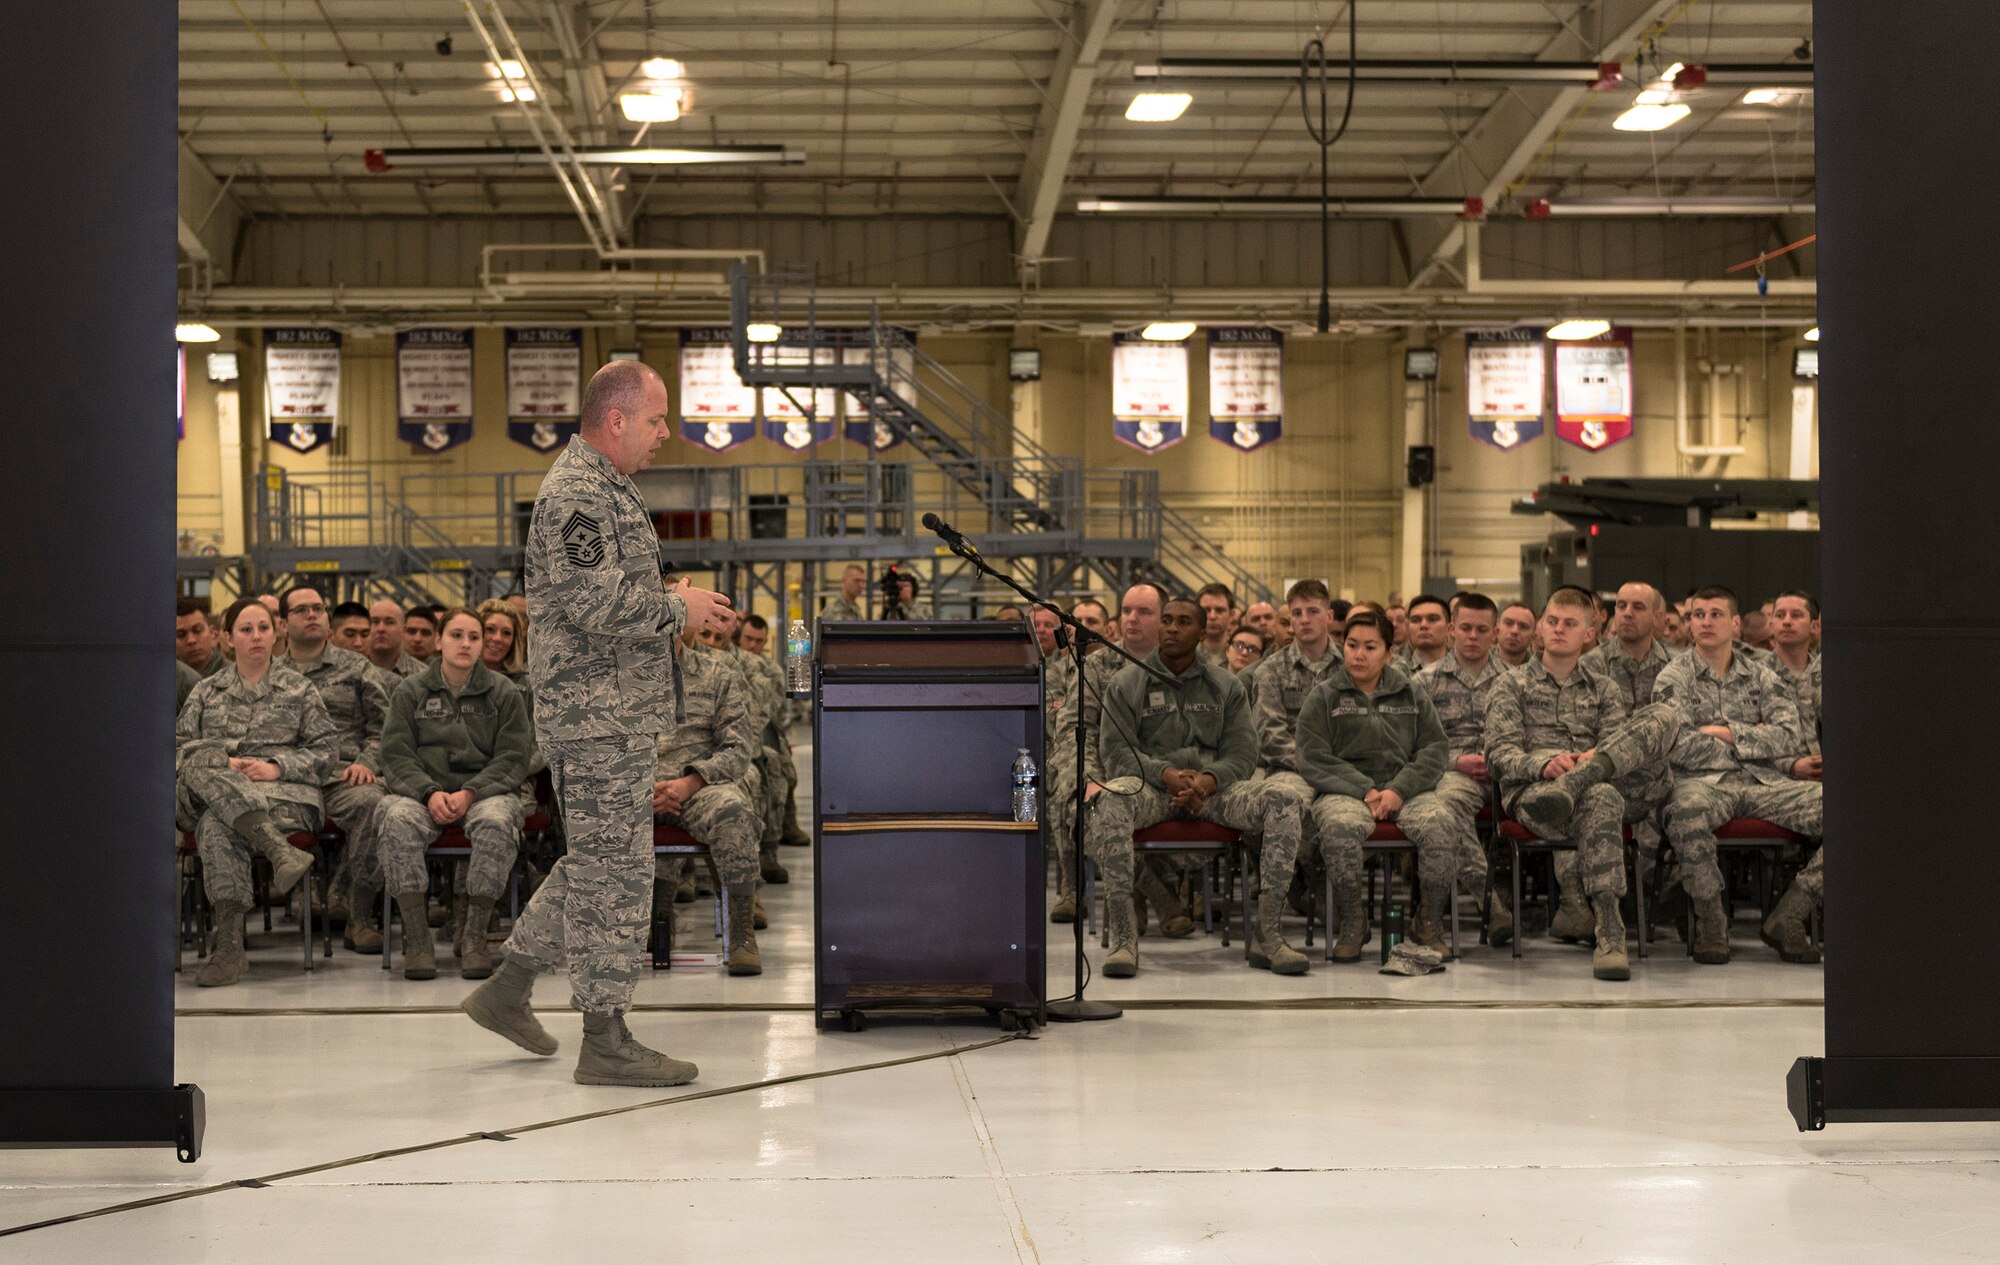 U.S. Air Force Chief Master Sgt. James W. Hotaling, the command chief of the Air National Guard, speaks with the Illinois Air National Guard 182nd Airlift Wing's enlisted corps in Peoria, Ill., March 4, 2016. Hotaling visited the base to discuss renewing the commitment to the profession of arms, the health of the force and embracing accomplishments. (U.S. Air National Guard photo by Staff Sgt. Lealan Buehrer)